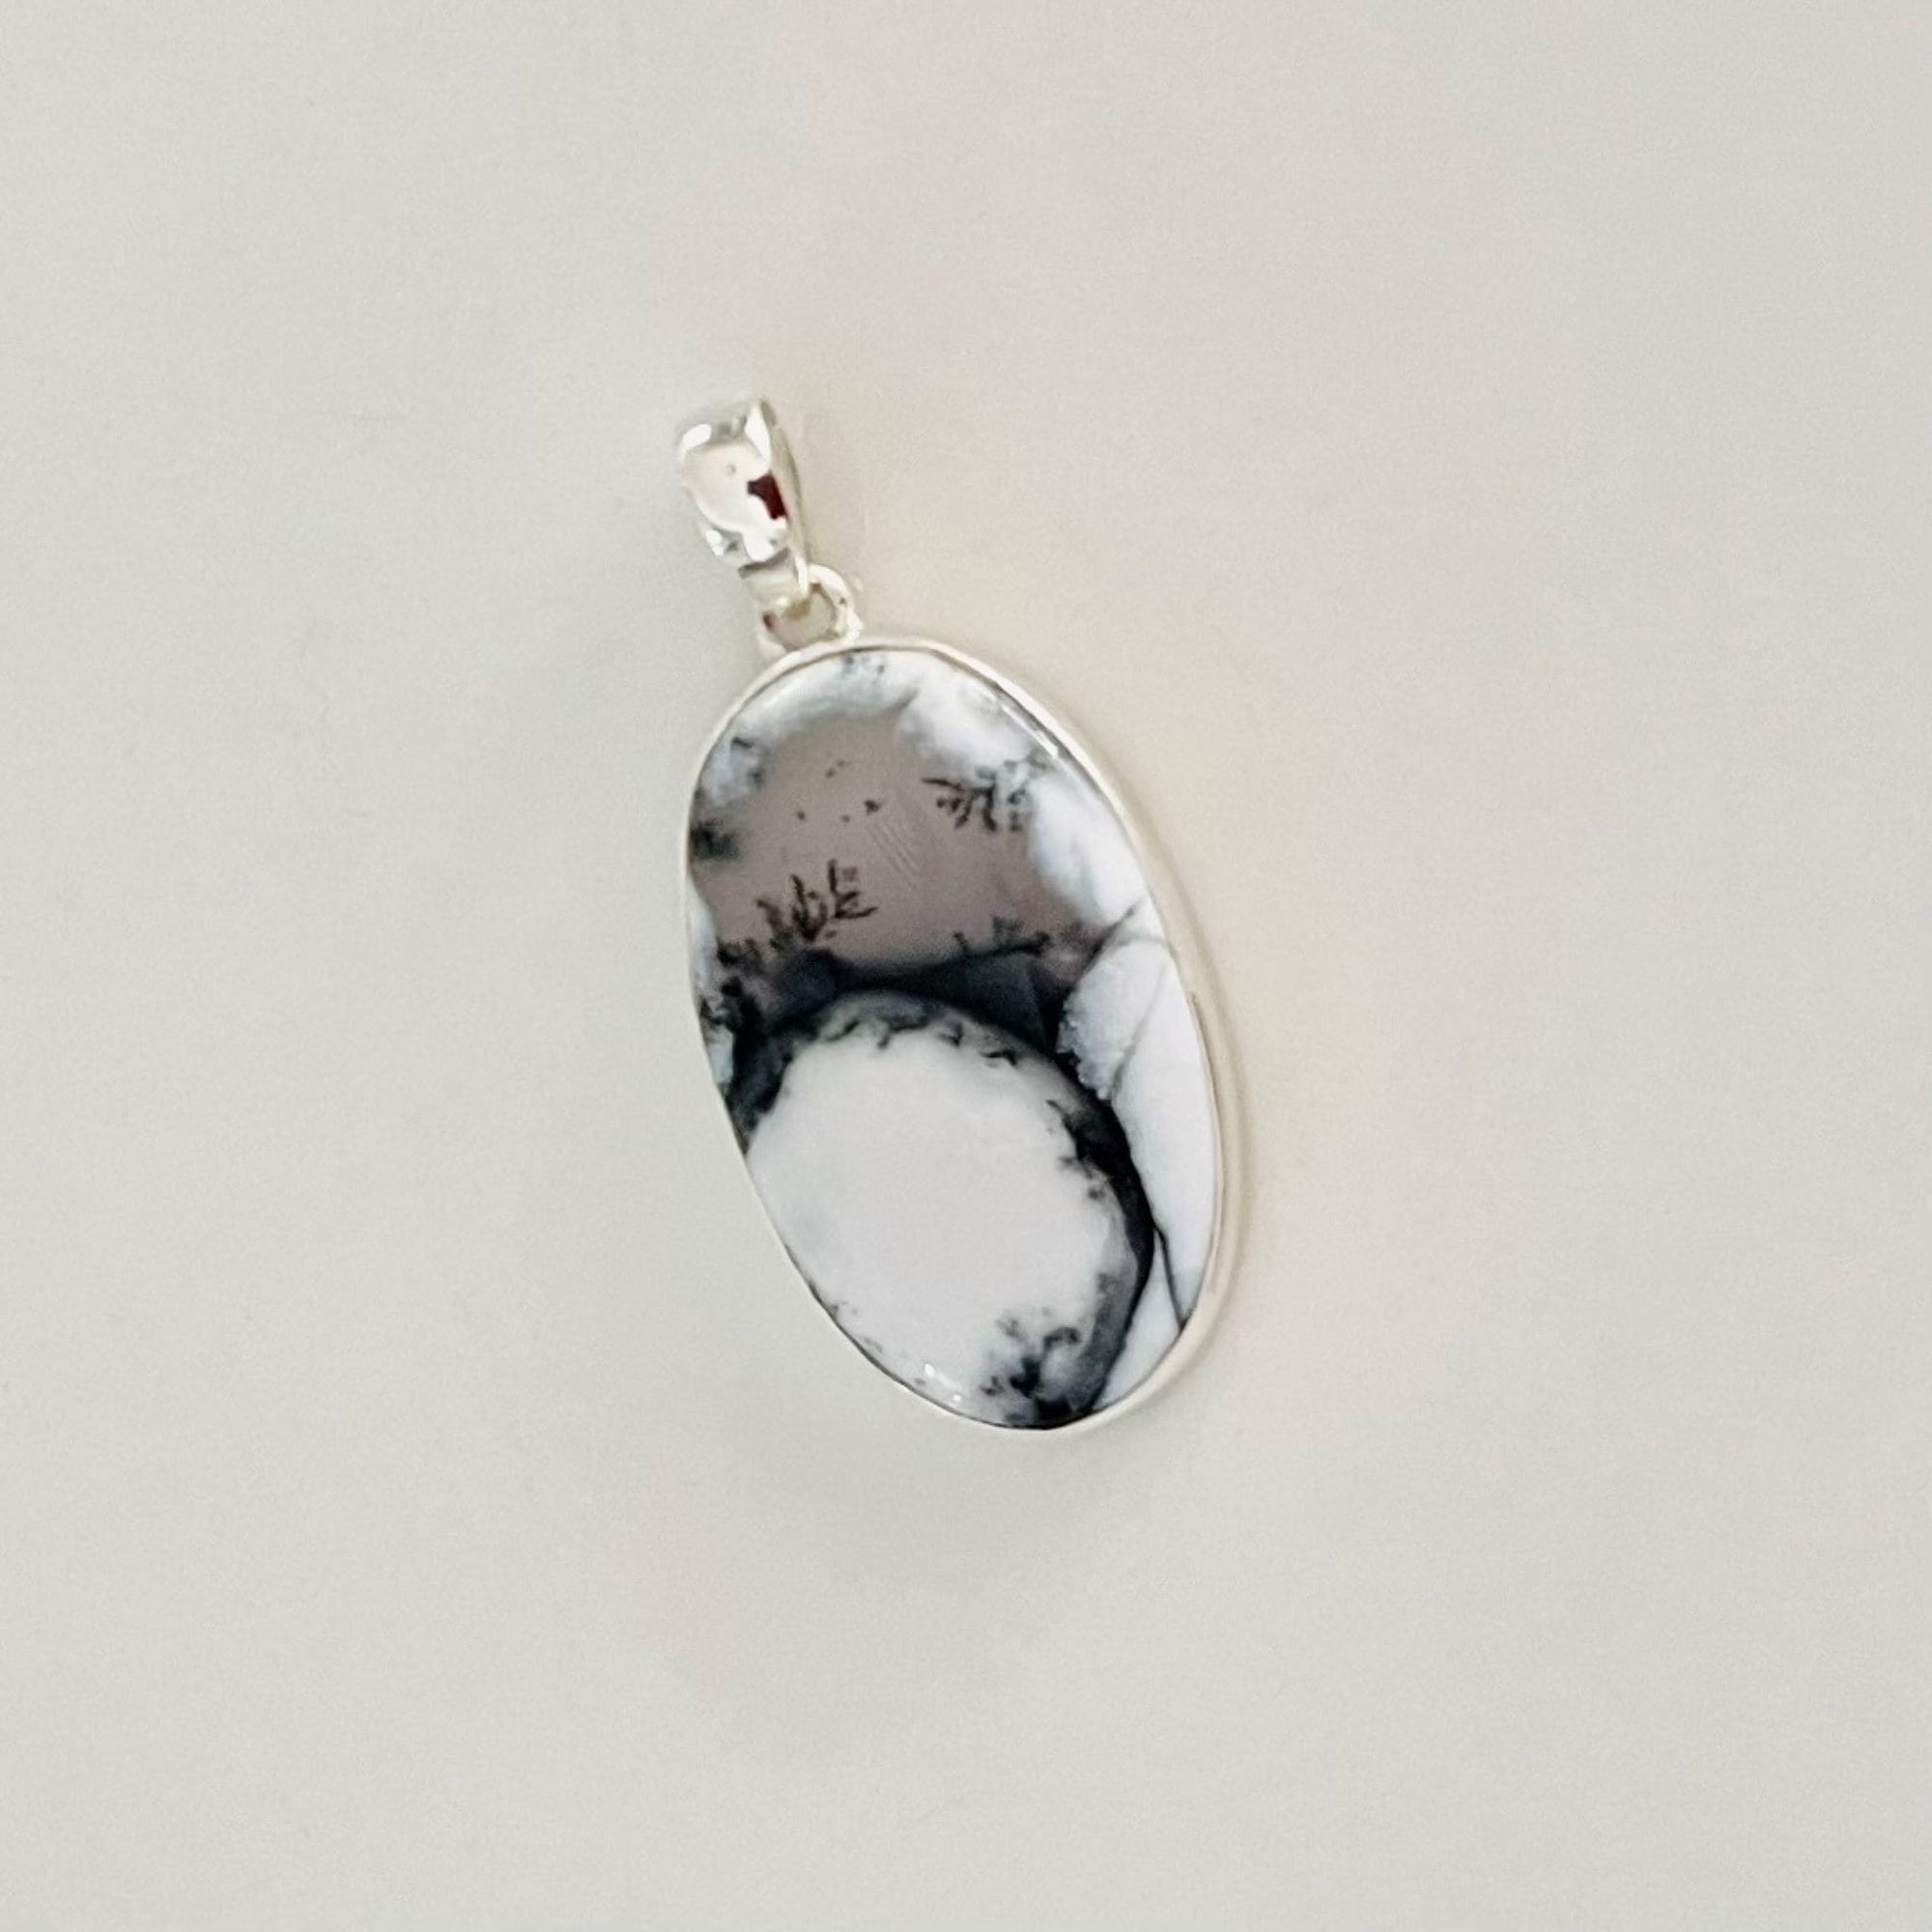 Beautifully Gifted OVAL AGATE PENDANT